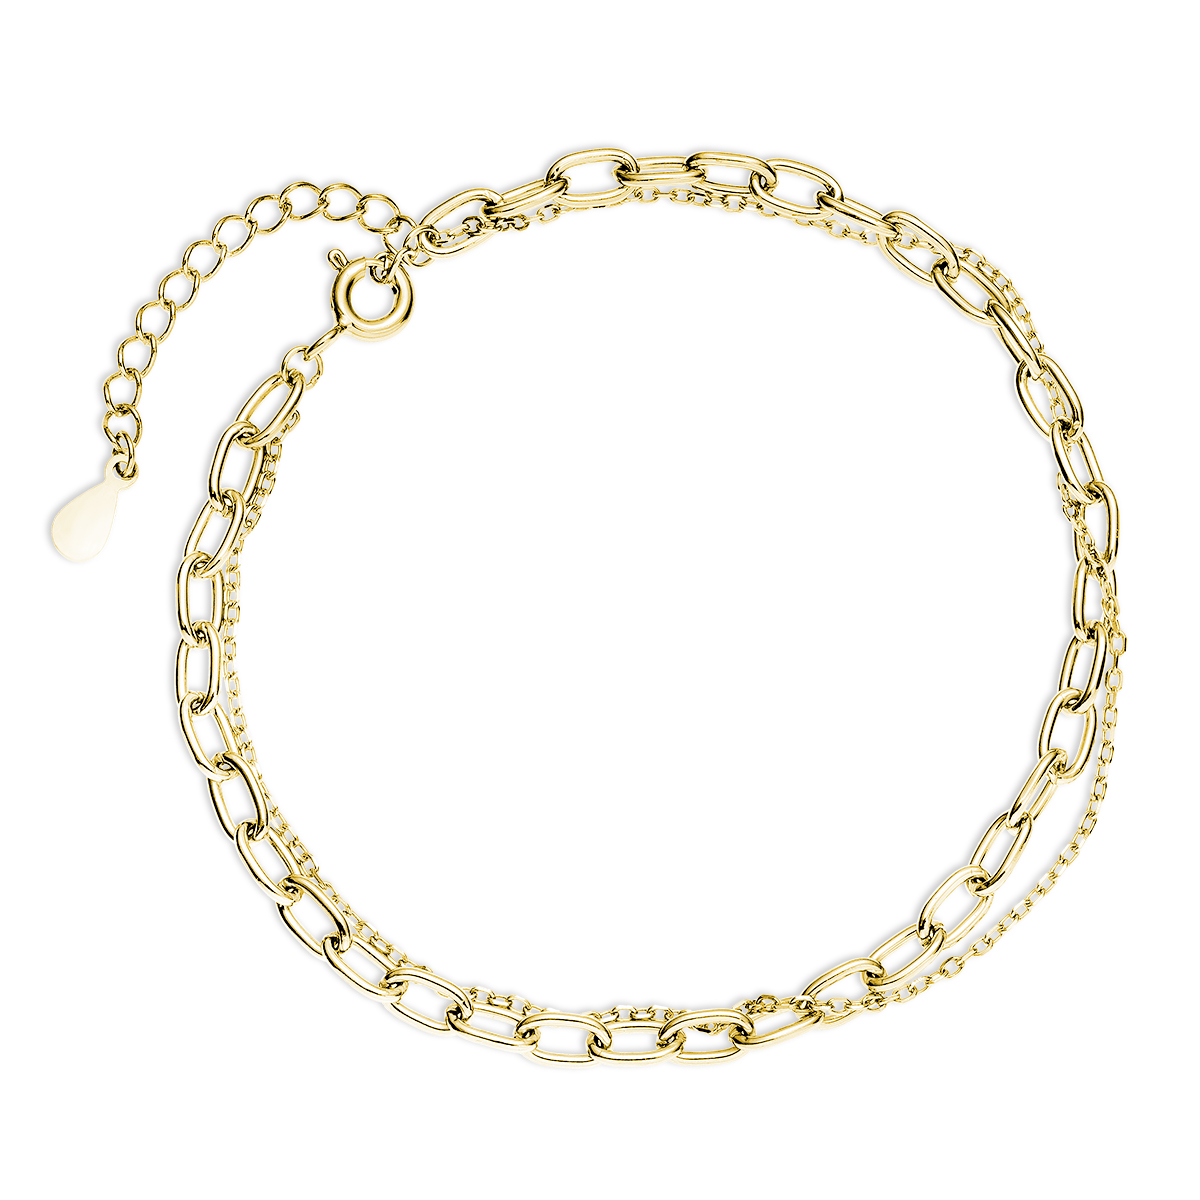 Link and Chain Bracelet–Gold Plated Link and Chain Bracelet – Gold Plated - ασήμι 925